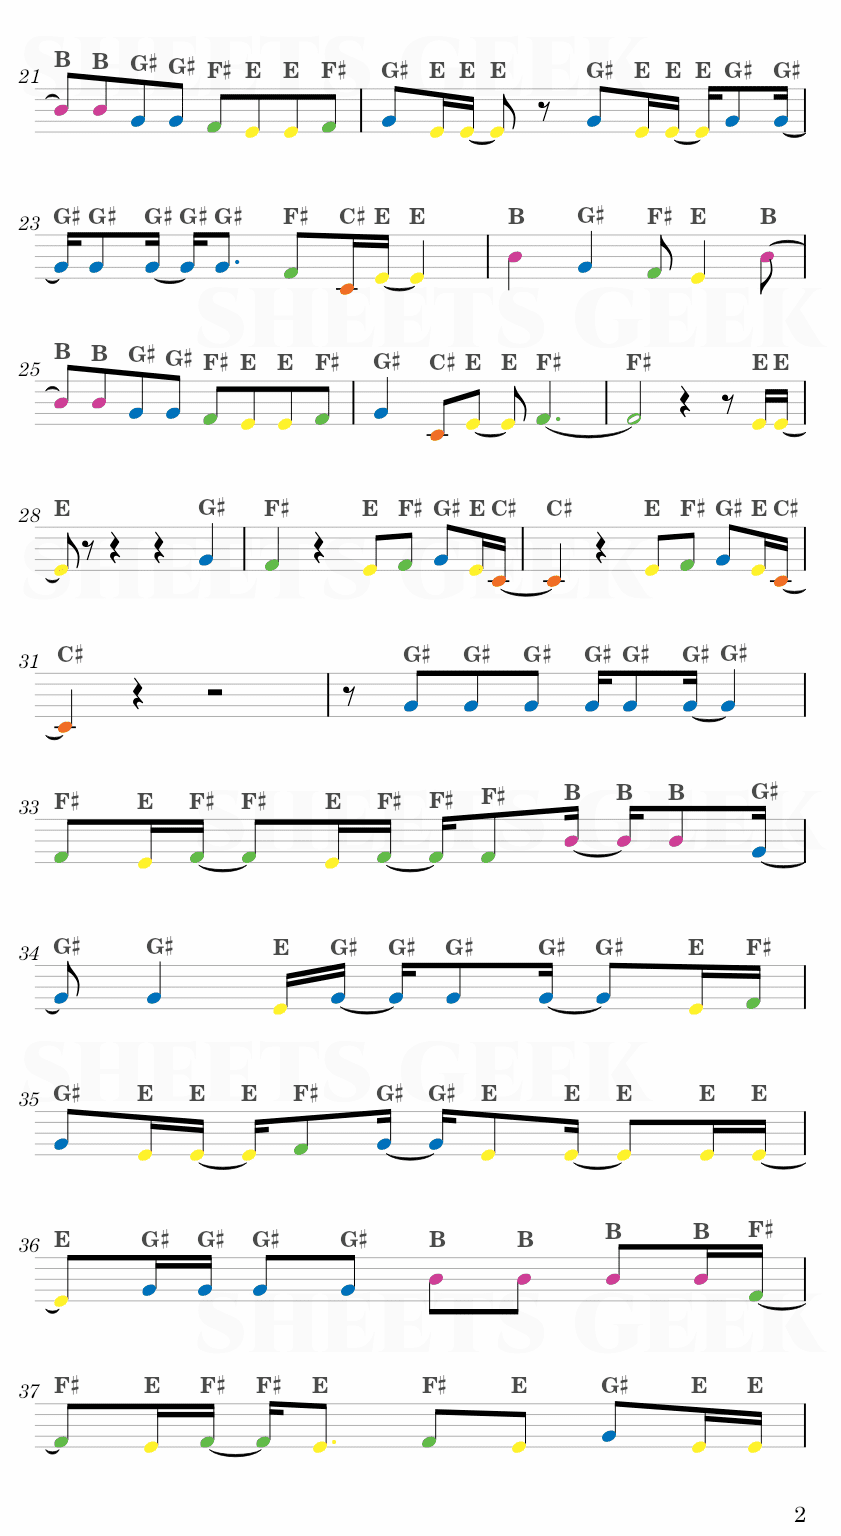 Hey, Soul Sister - Train Easy Sheet Music Free for piano, keyboard, flute, violin, sax, cello page 2